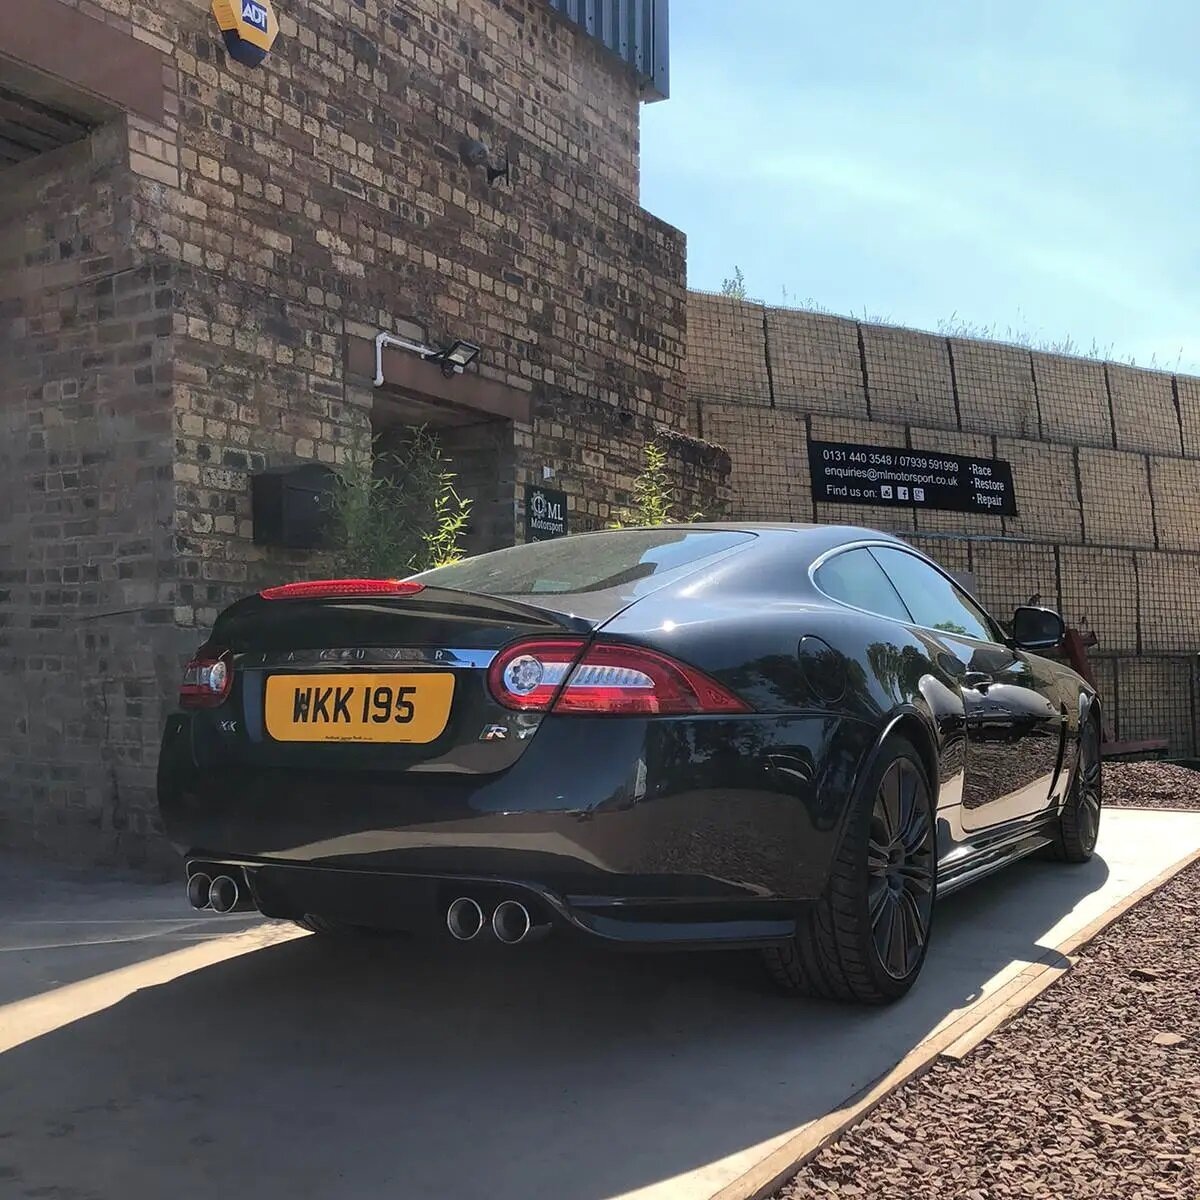 Nice new uprated exhaust system fitted to our customers Jaguar XKR along with a remap taking it to over 600bhp and enough torque to pull a lorry!!!

Video to follow in our stories 😎

#jaguar #jaguarowners #jaguarxkr #xkrv8 #v8 #v8supercharged #super